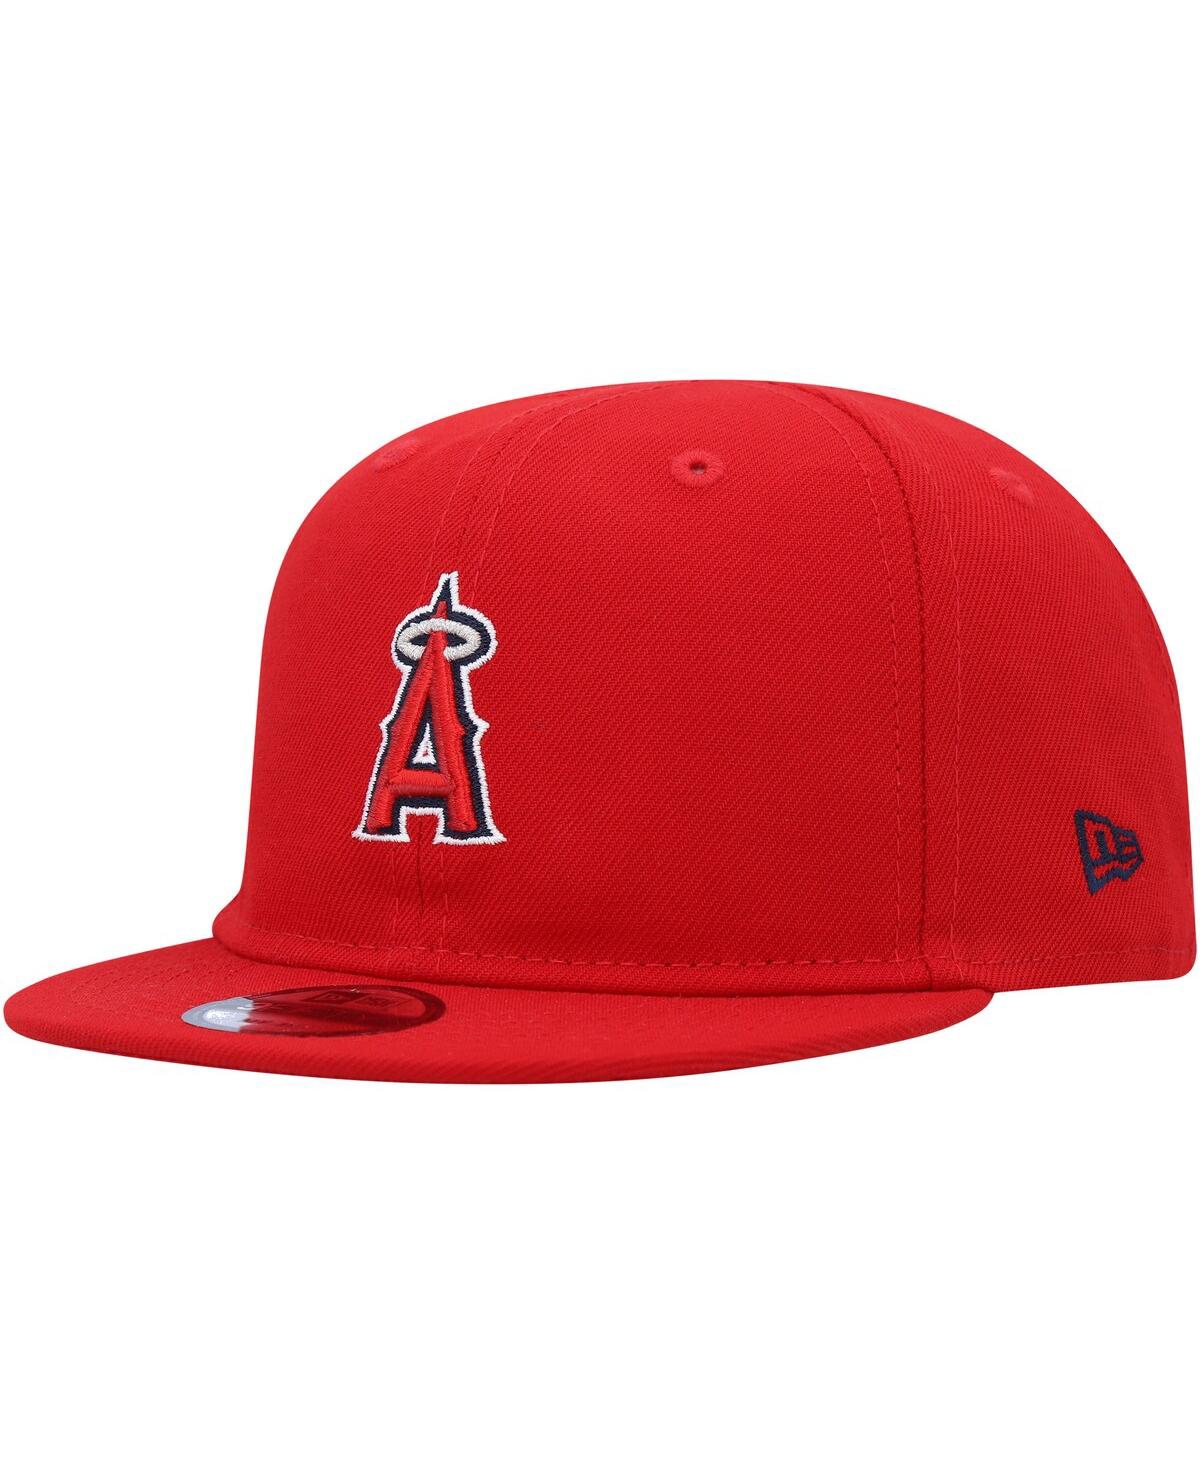 New Era Babies' Infant Boys And Girls  Red Los Angeles Angels My First 9fifty Adjustable Hat